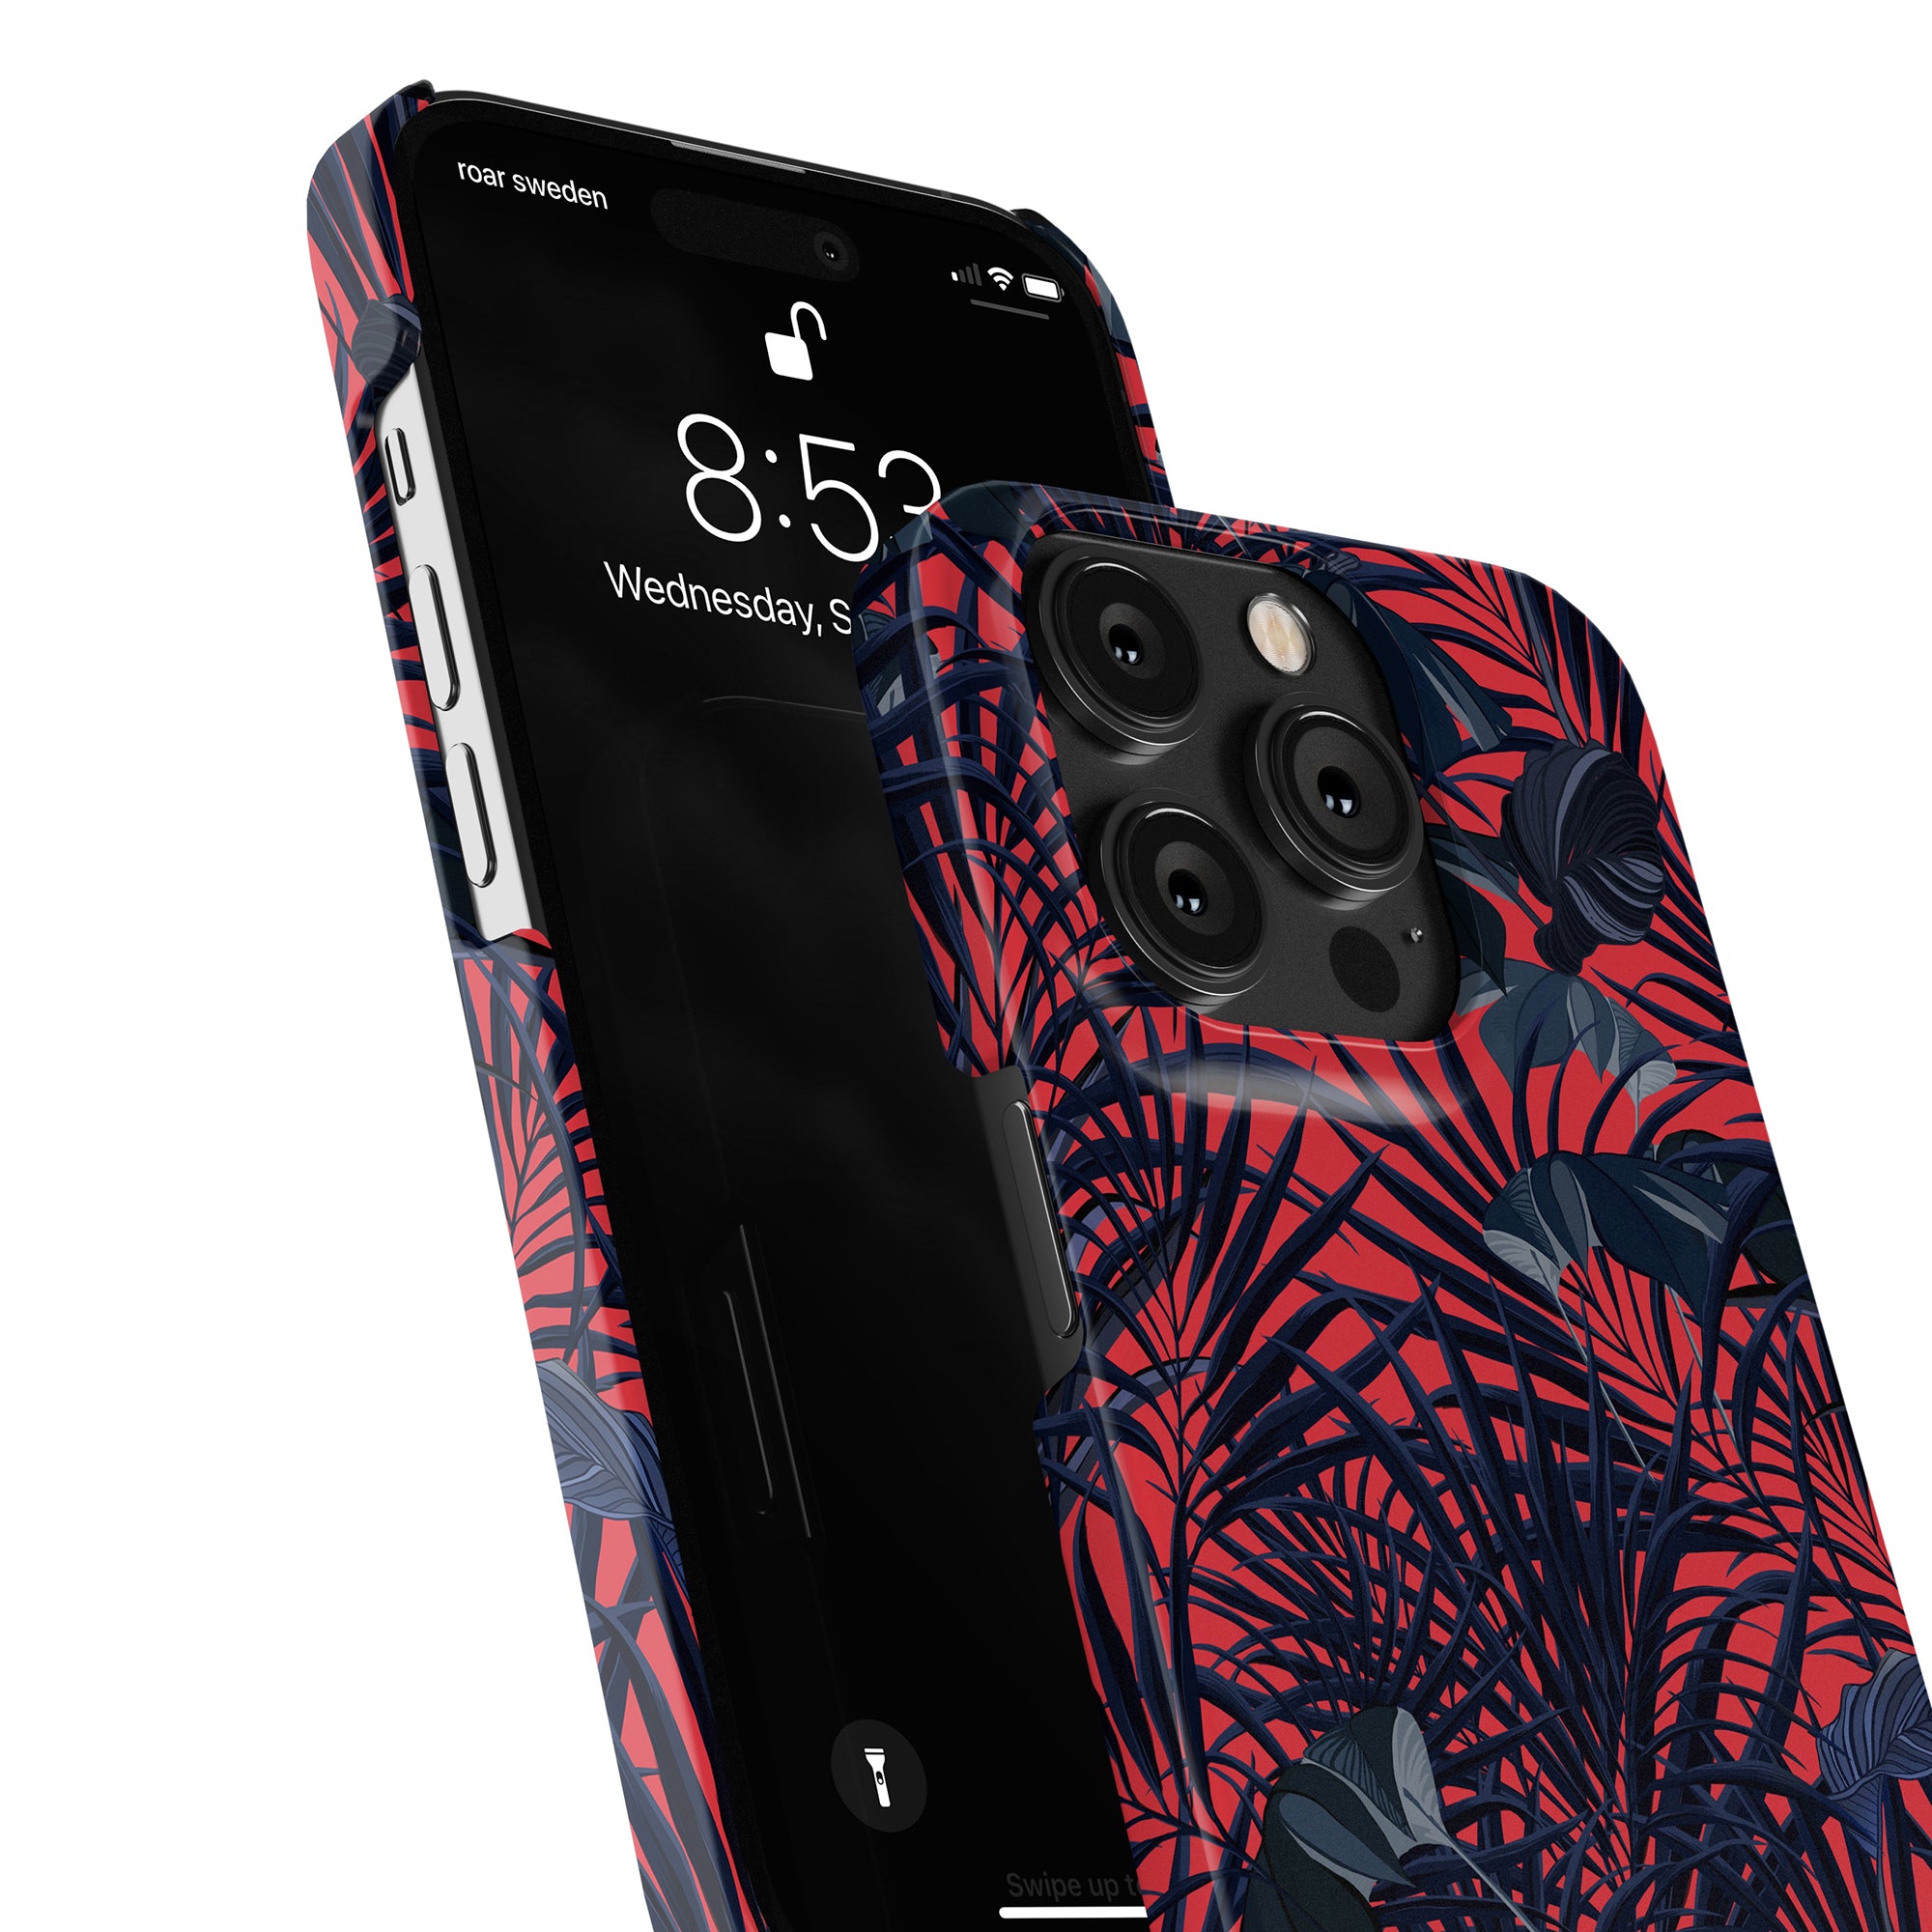 A smartphone with a black screen displaying 8:53, Wednesday, Sept 5, in a Red Tropics - Slim case featuring vibrant red and dark blue leaf patterns.